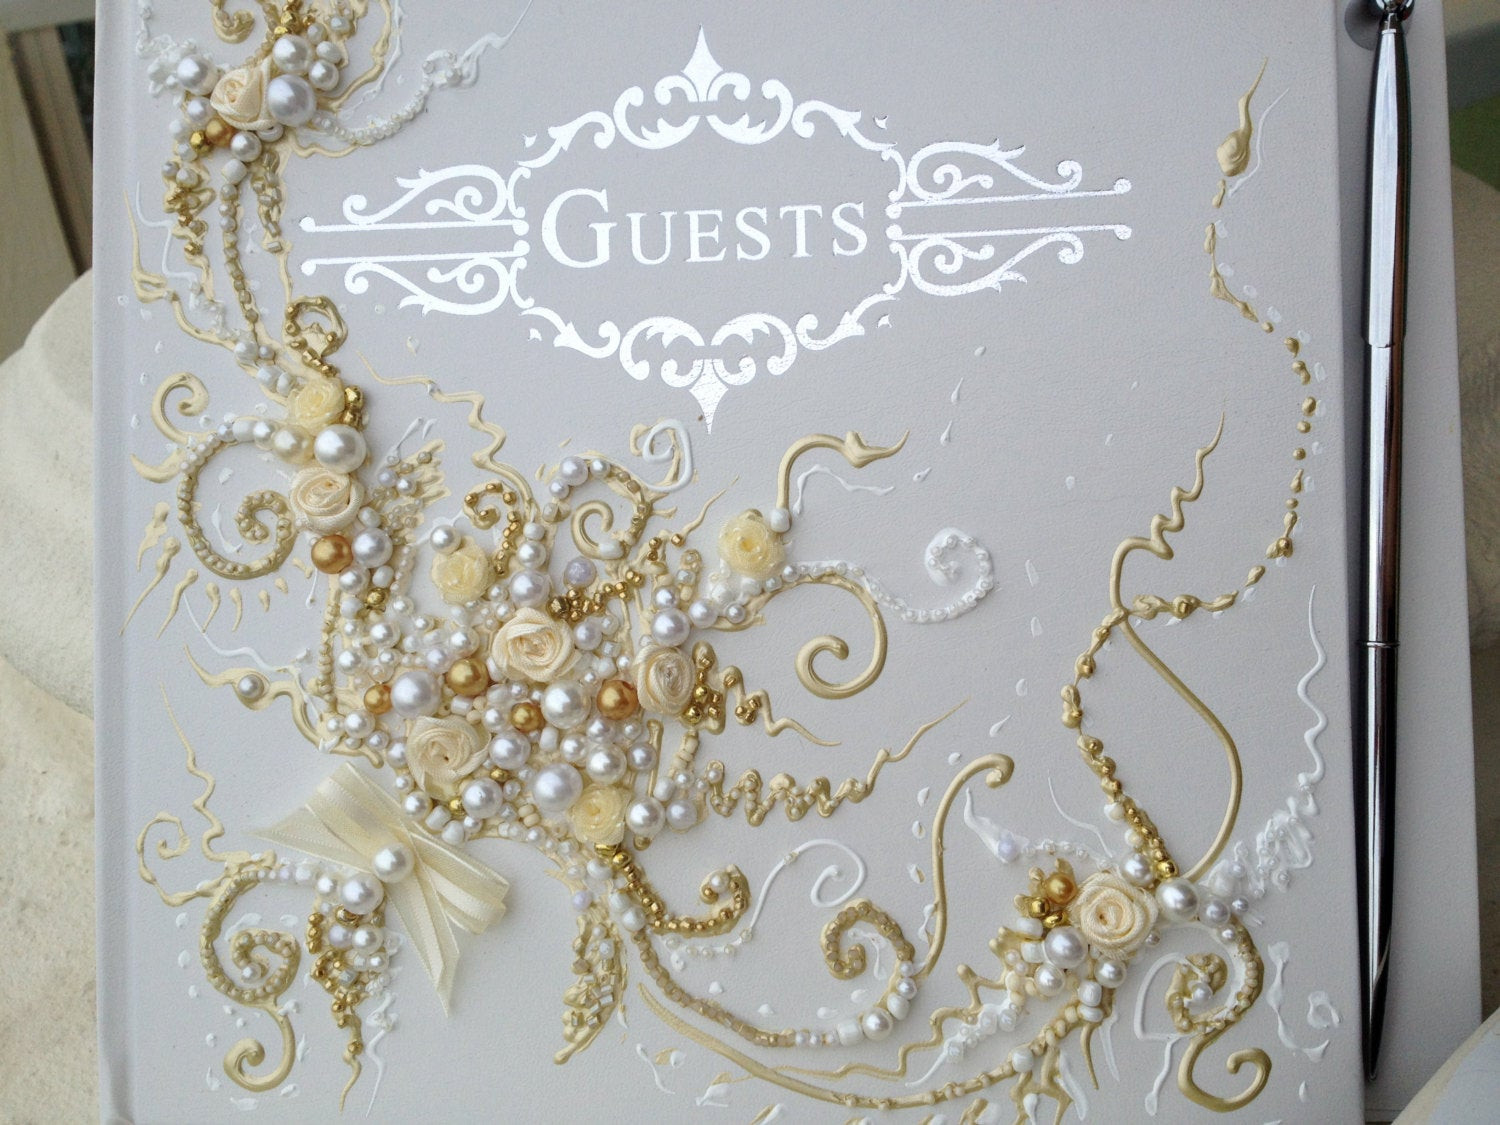 Beautiful Wedding Guest Books
 Beautiful Wedding guest book in gold white and ivory